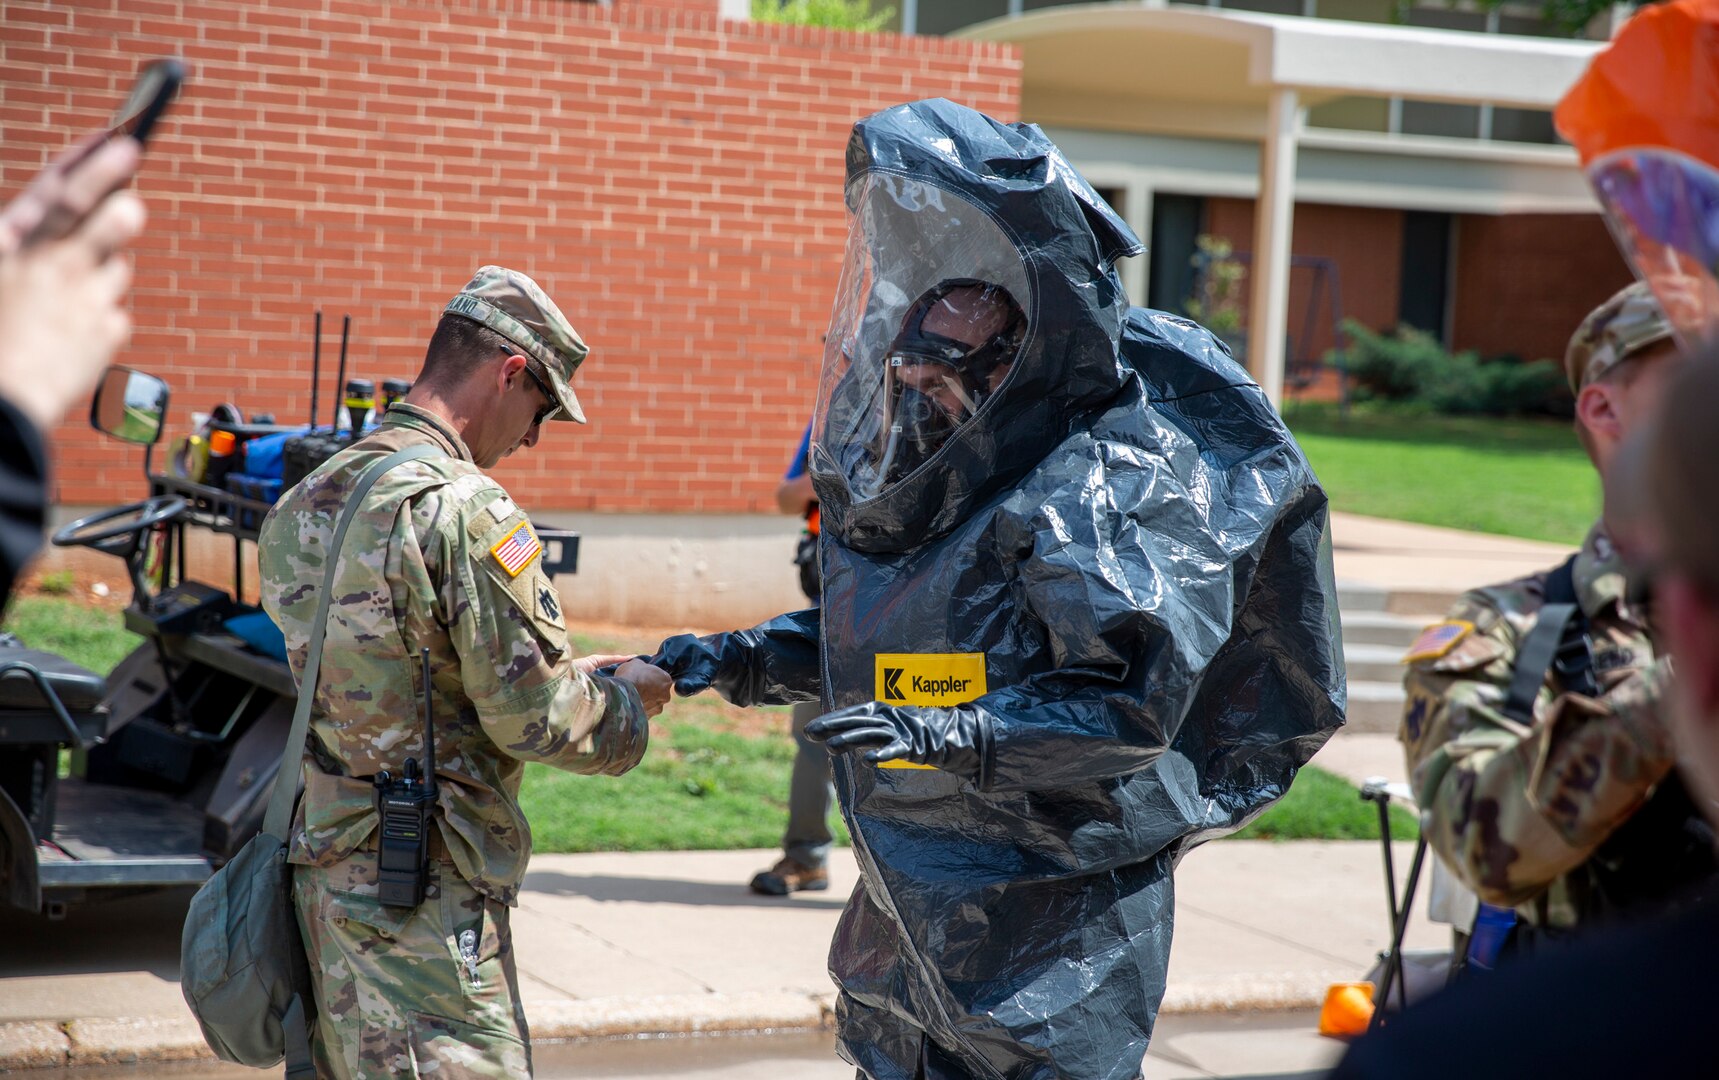 Oklahoma National Guard members with the 63rd Civil Support Team Sgt. 1st Class Ronald Poland (left) helps Sgt. Douglas Engel (right) don his protective gear during a training exercise in Weatherford, Oklahoma, May 23, 2023. In a joint effort to enhance emergency response capabilities, the Oklahoma National Guard's 63rd CST collaborated with local first responders during a full-scale exercise held in Custer and Washita County and the City of Weatherford, May 23-25, 2023. The comprehensive exercise provided an invaluable opportunity for all participants to enhance their coordination, communication, and response capabilities. (Oklahoma National Guard photo by Leanna Maschino)